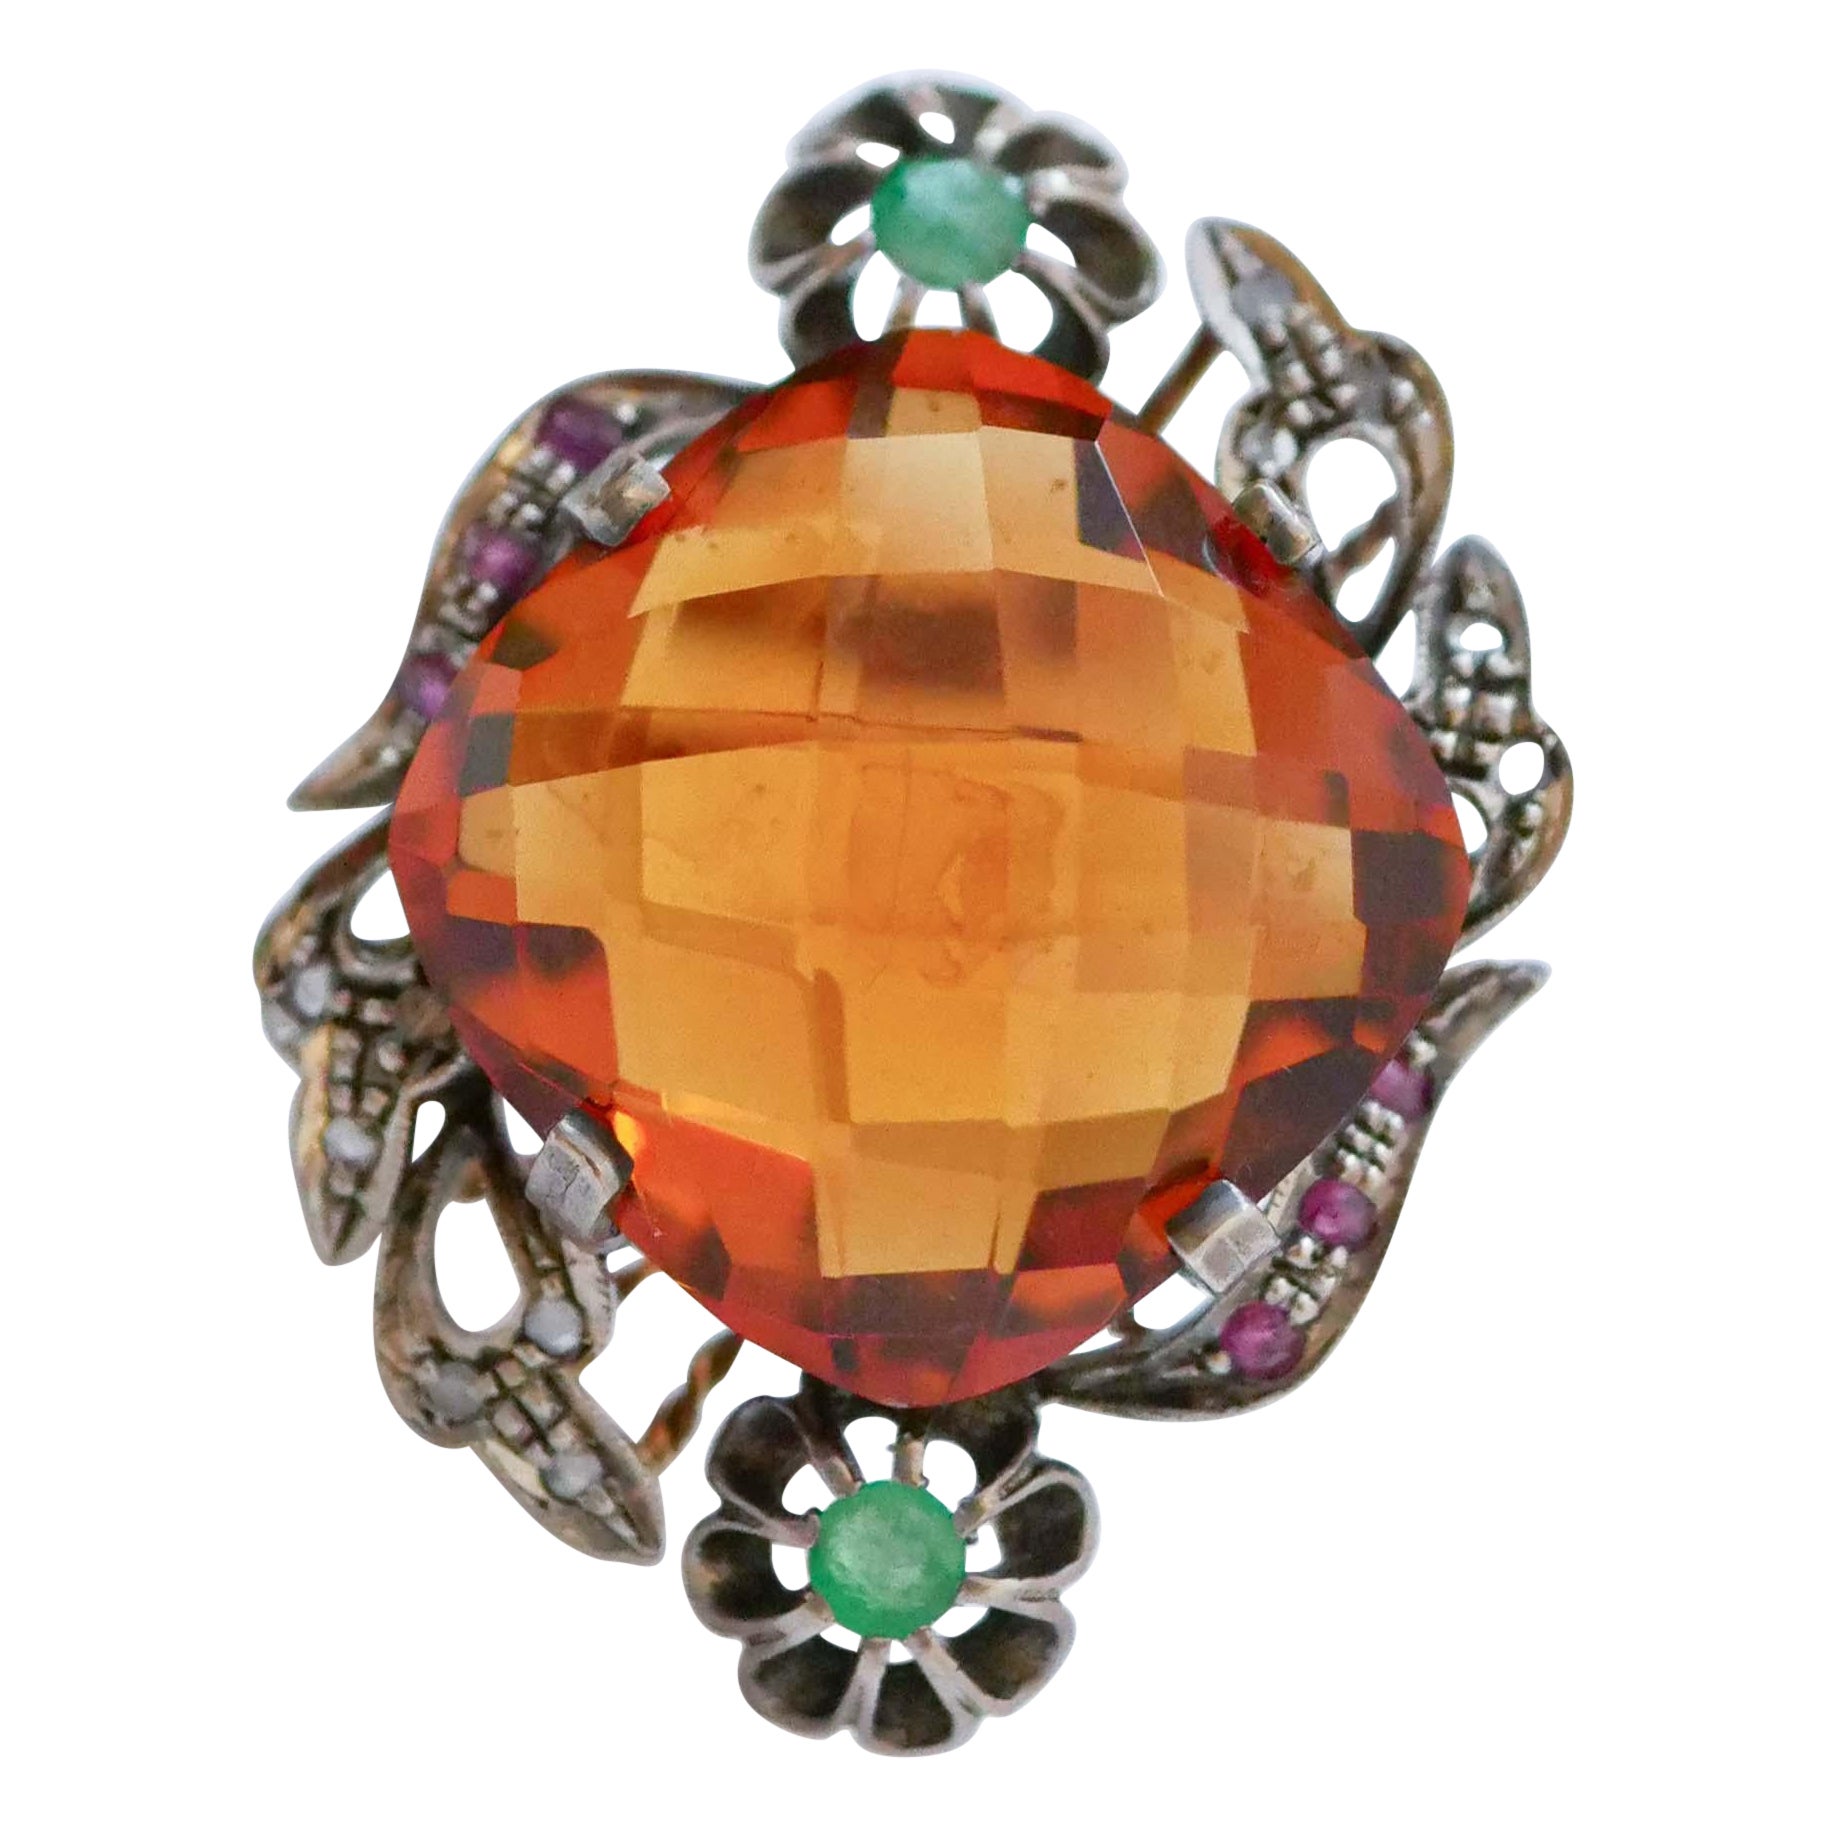 Topaz, Emeralds, Rubies, Diamonds, Rose Gold and Silver Ring.